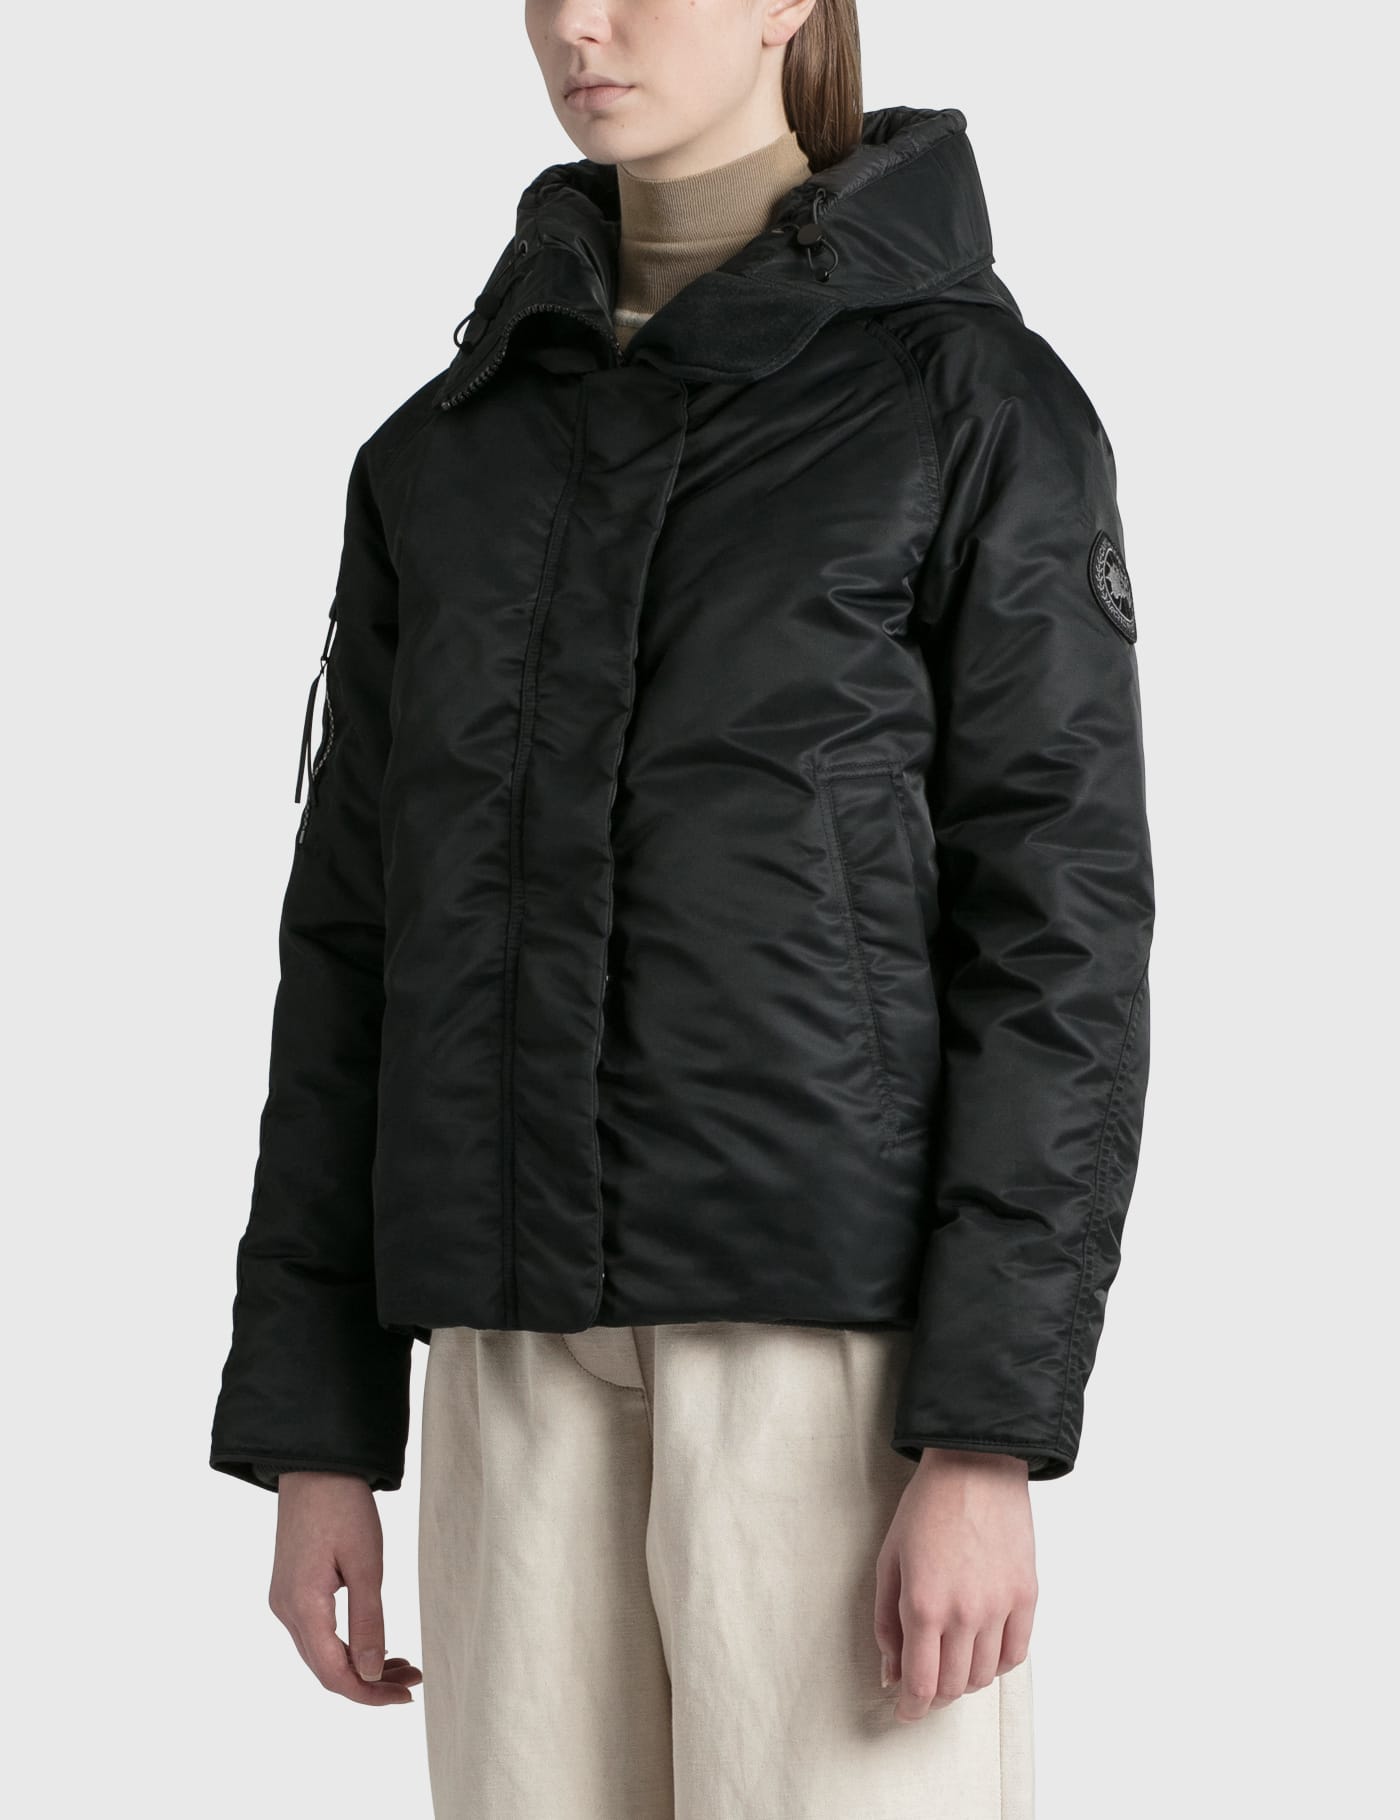 Canada Goose - Everleigh Bomber | HBX - Globally Curated Fashion